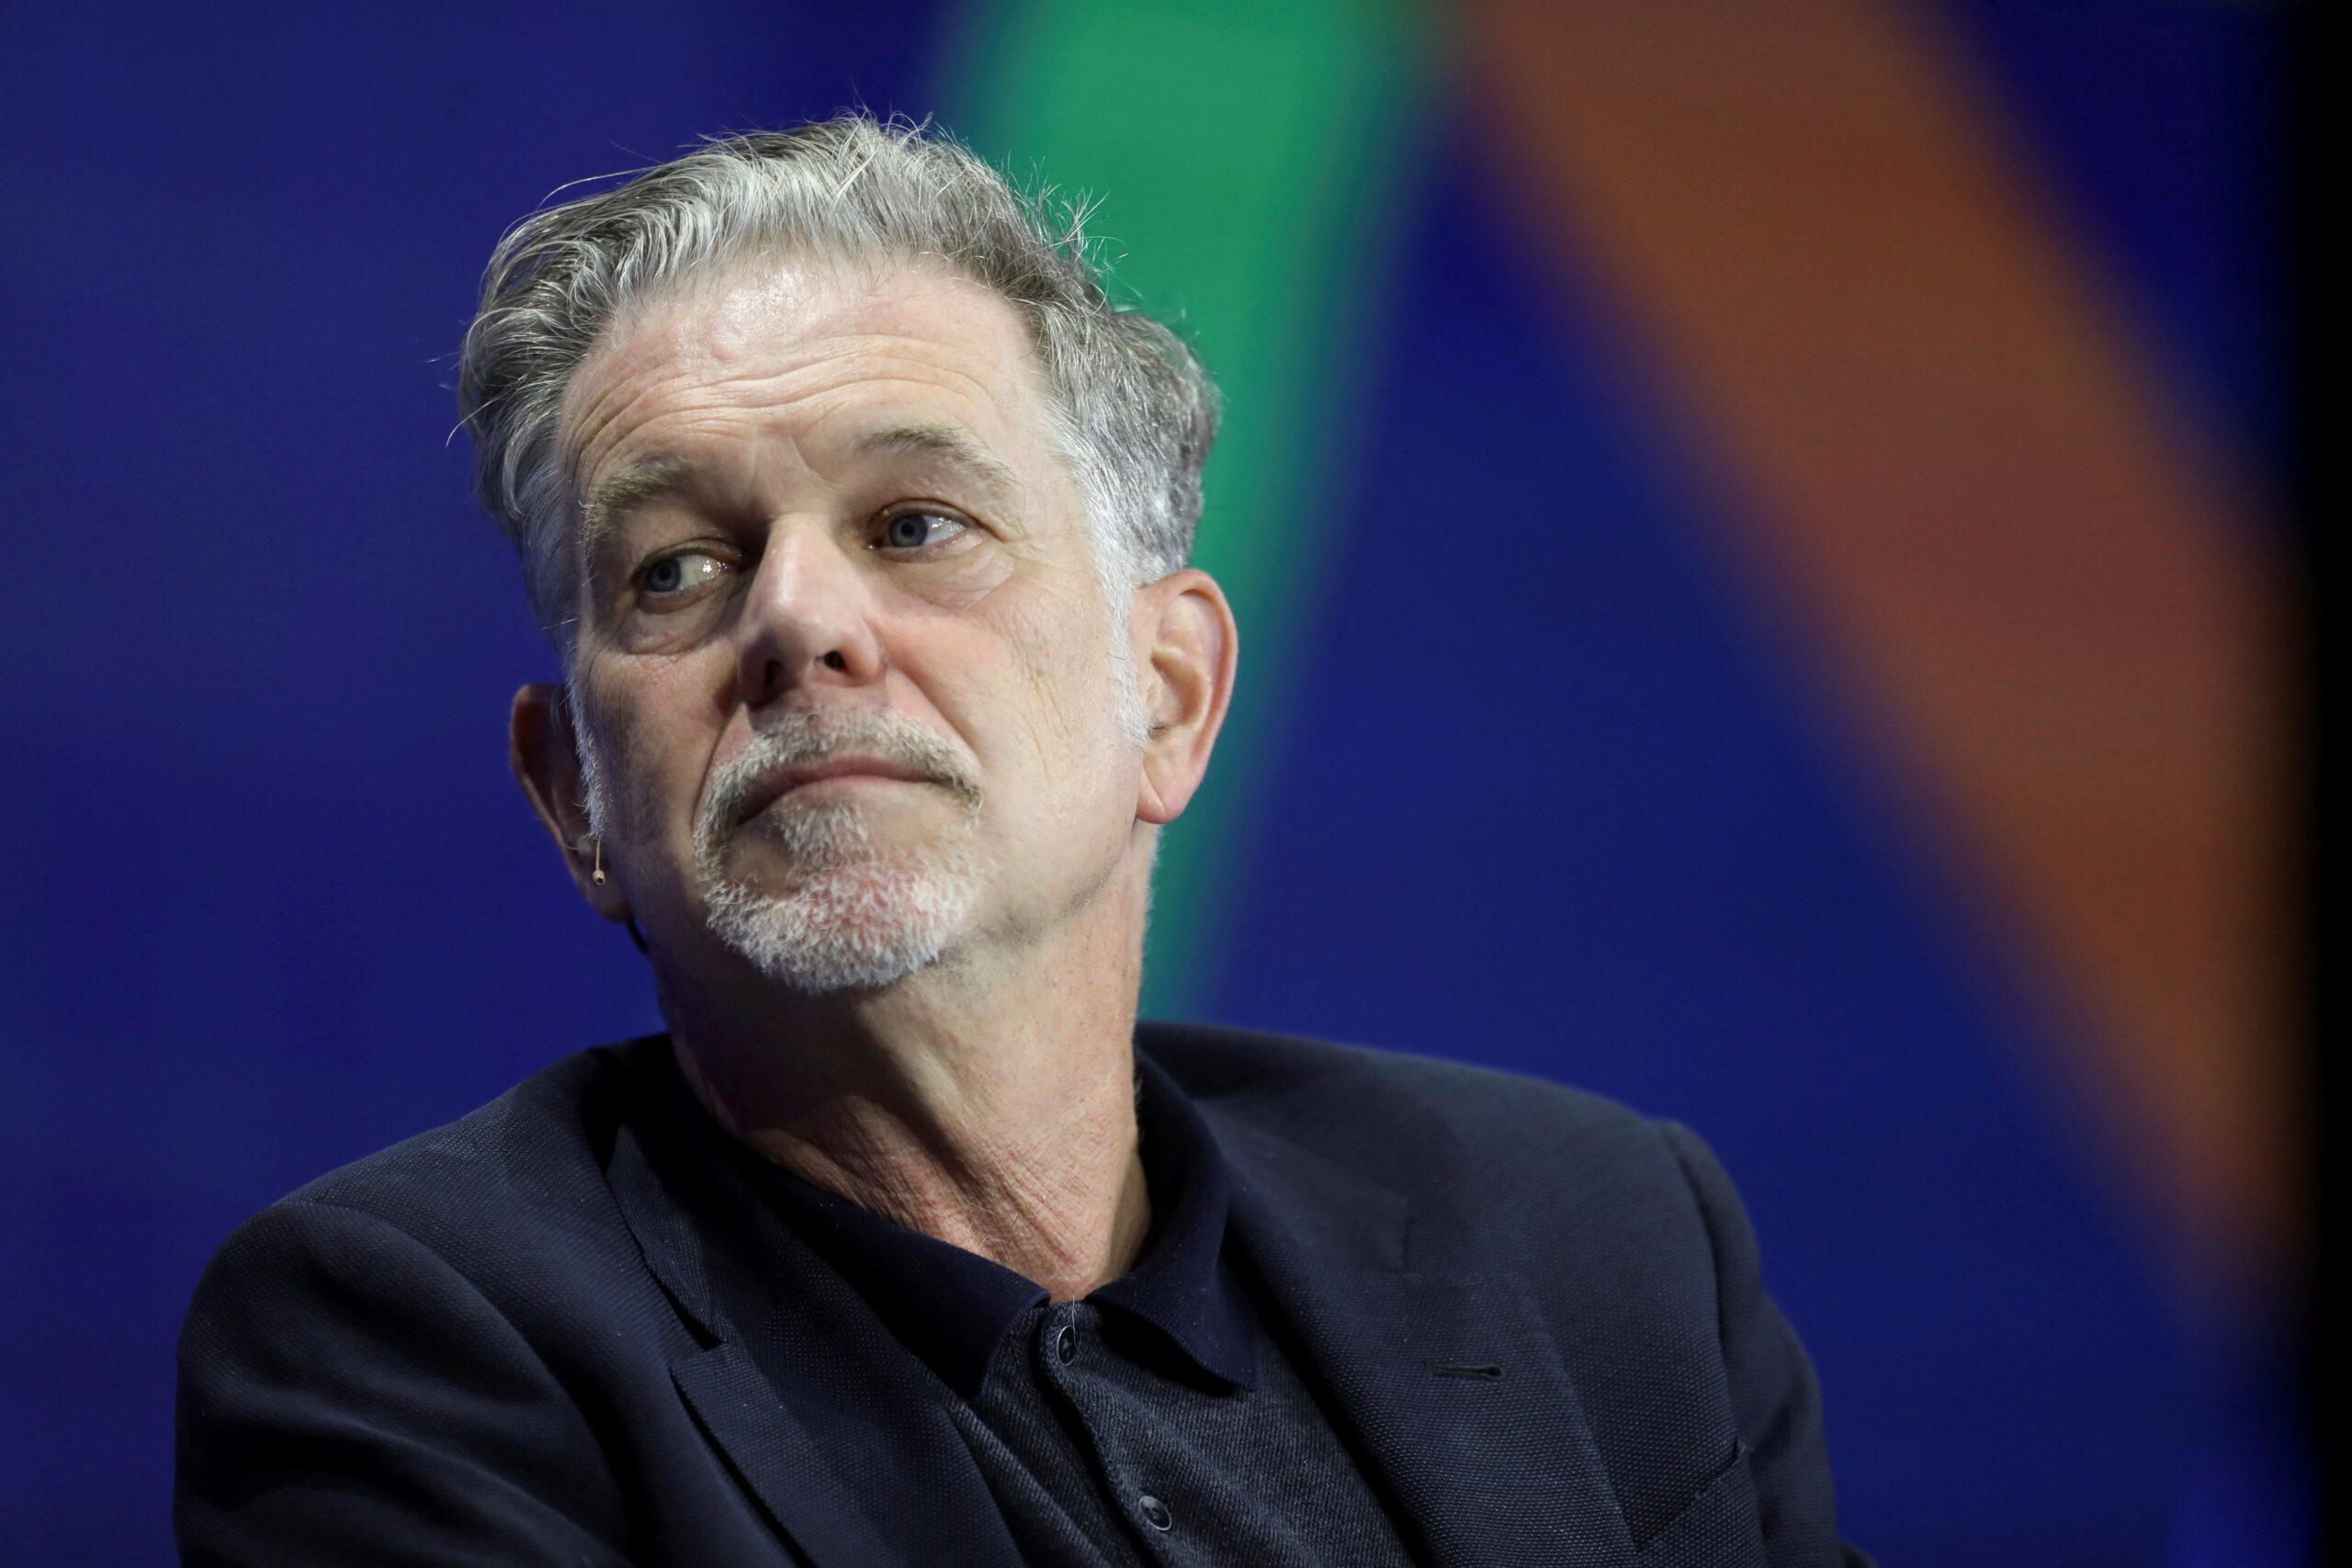 Netflix founder Reed Hastings steps down as co-CEO, fills executive chairman role